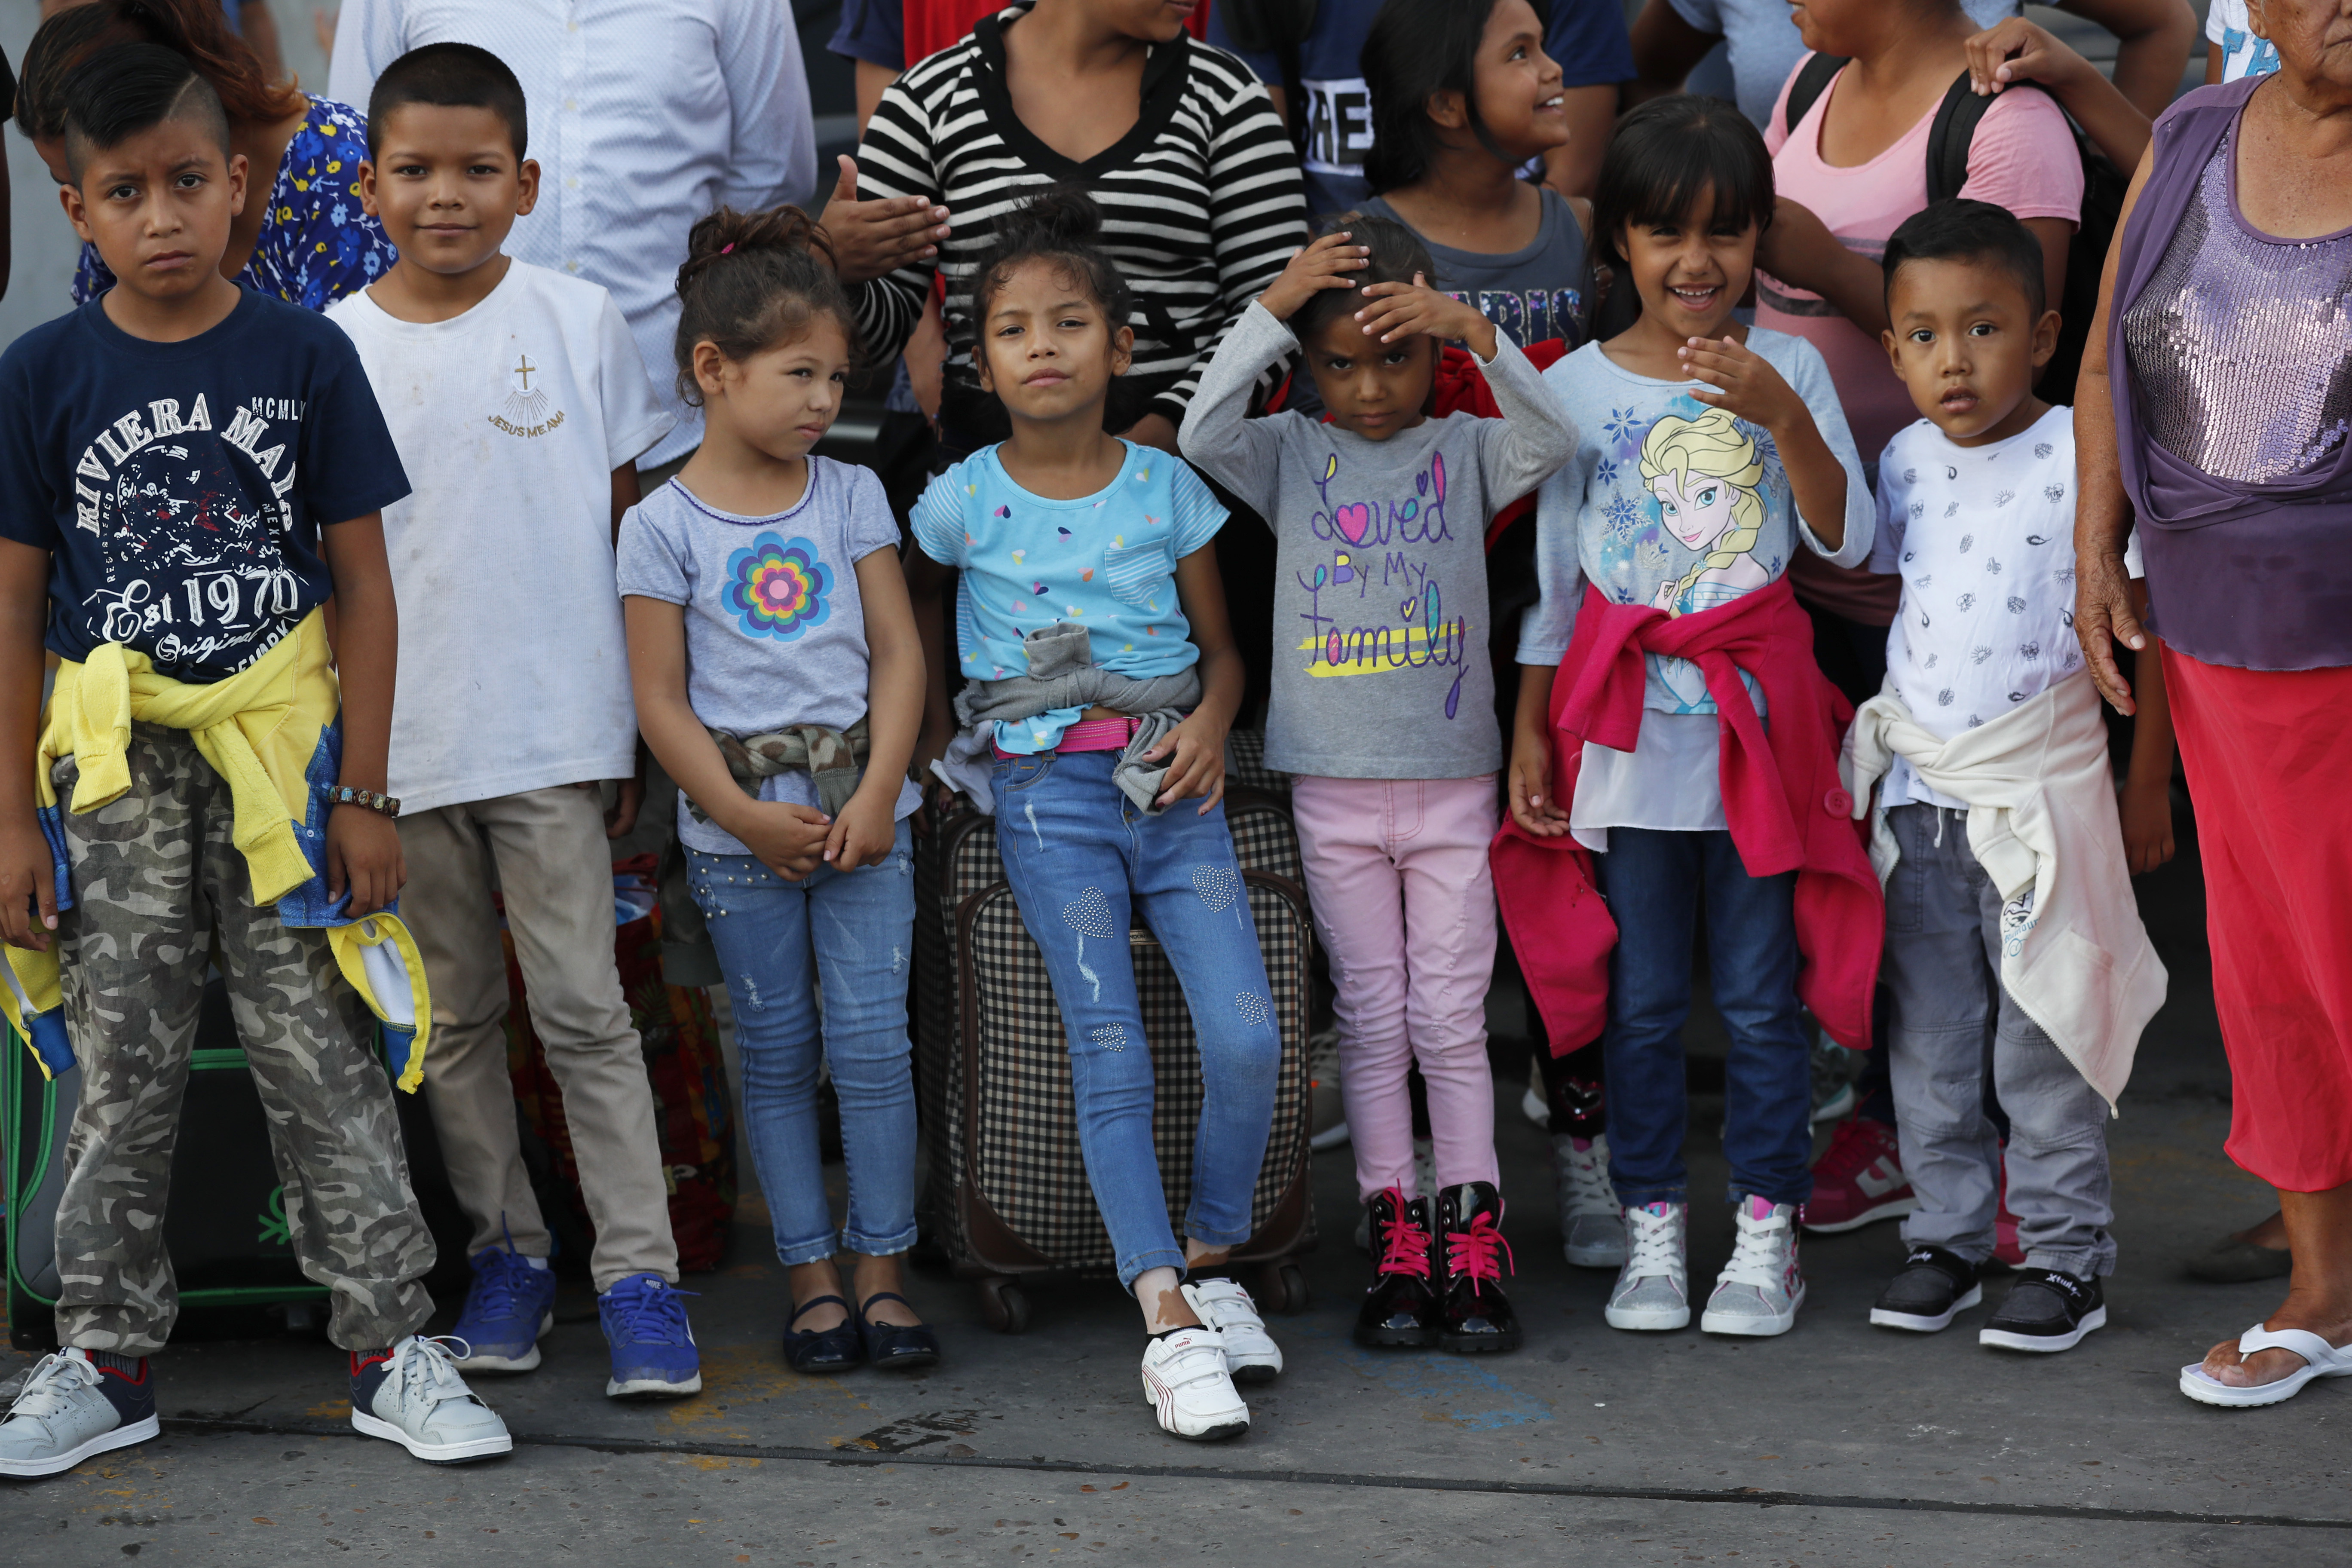 Migrant children and their families who were lodging at the AMAR migrant shelter, get off the Pastor's vehicle to go to the Mexican immigration office on International Bridge 1, before being taken to apply for asylum on the United States side, in Nuevo Laredo, Mexico, Wednesday, July 17, 2019. Asylum-seekers grappled to understand what a new U.S. policy that all but eliminates refugee claims by Central Americans and many others meant for their bids to find a better life in America amid a chaos of rumors, confusion and fear. (AP Photo/Marco Ugarte)